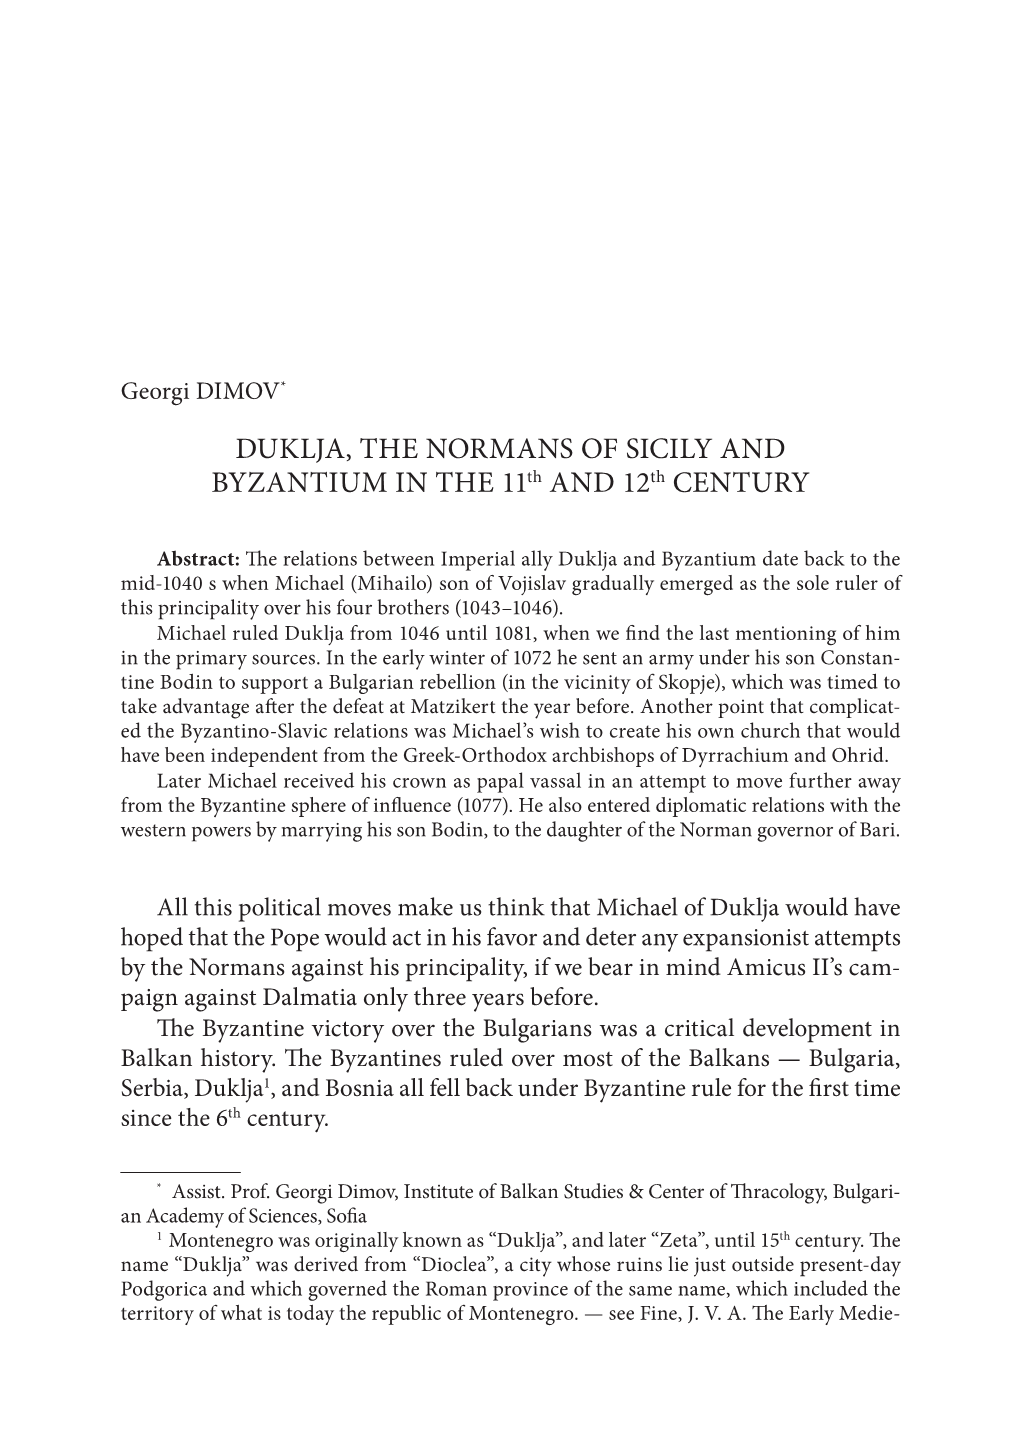 Duklja, the Normans of Sicily and Byzantium in the 11Th and 12Th Century 21